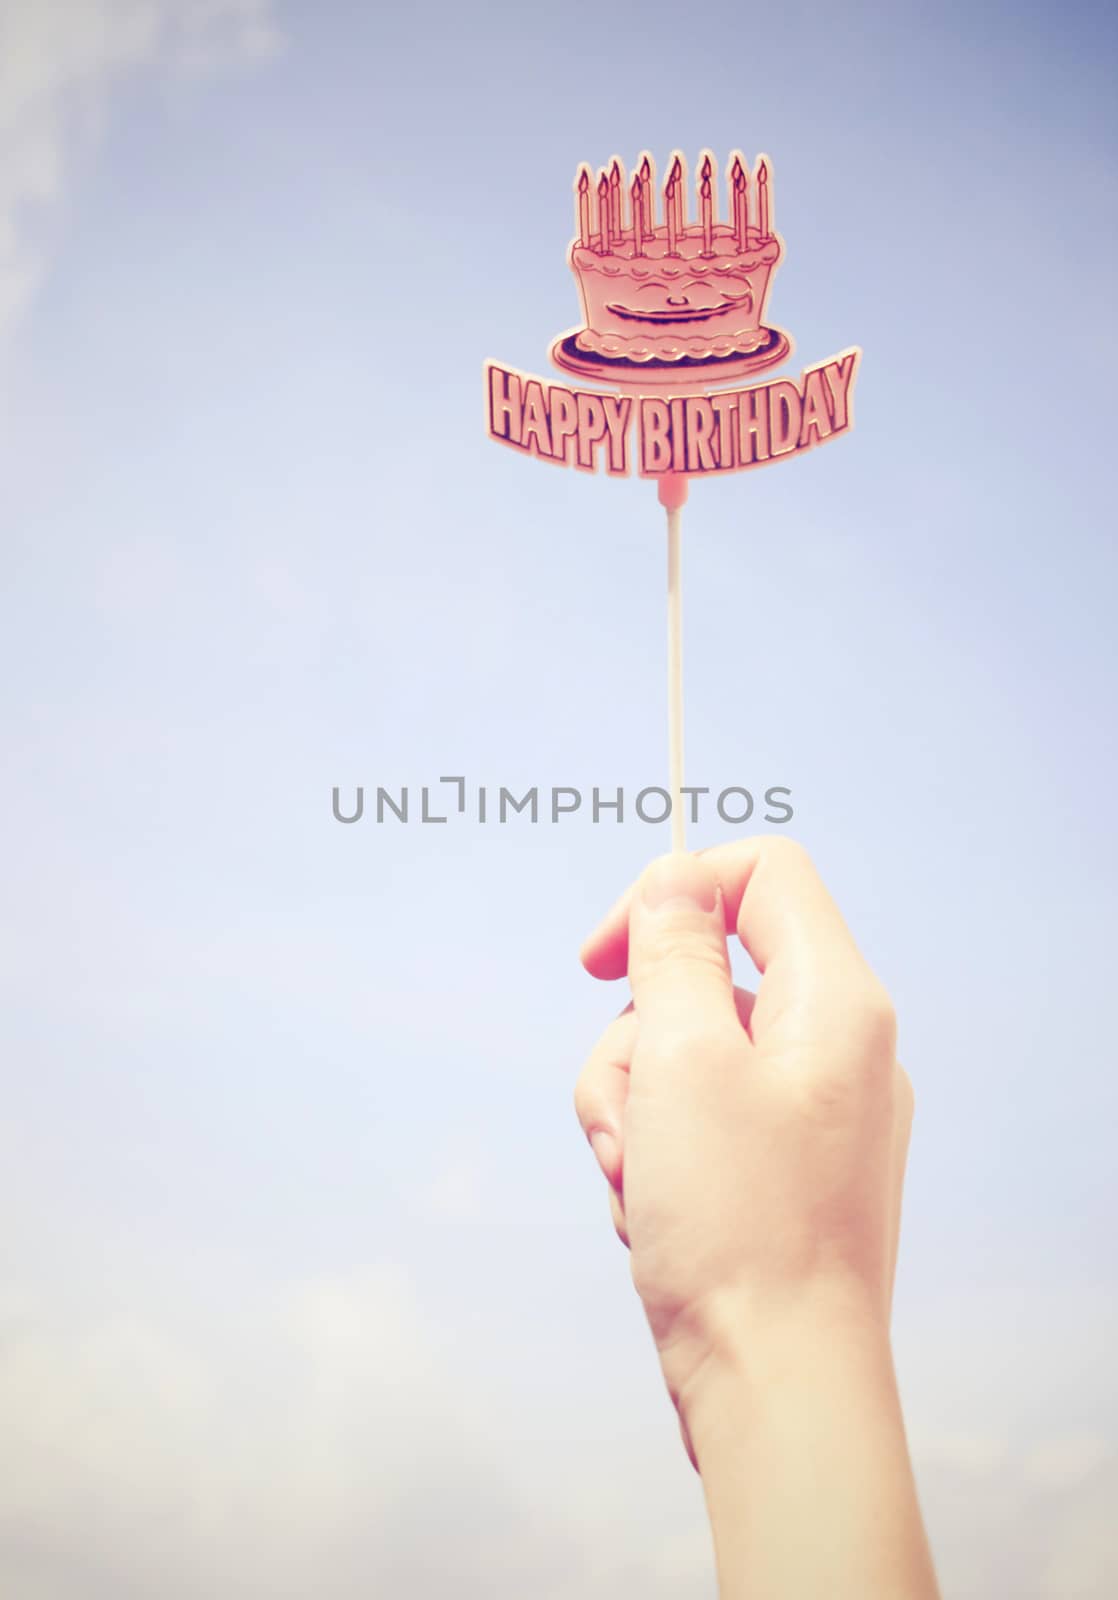 Hand holding happy birthday tag with blue sky, retro filter effect